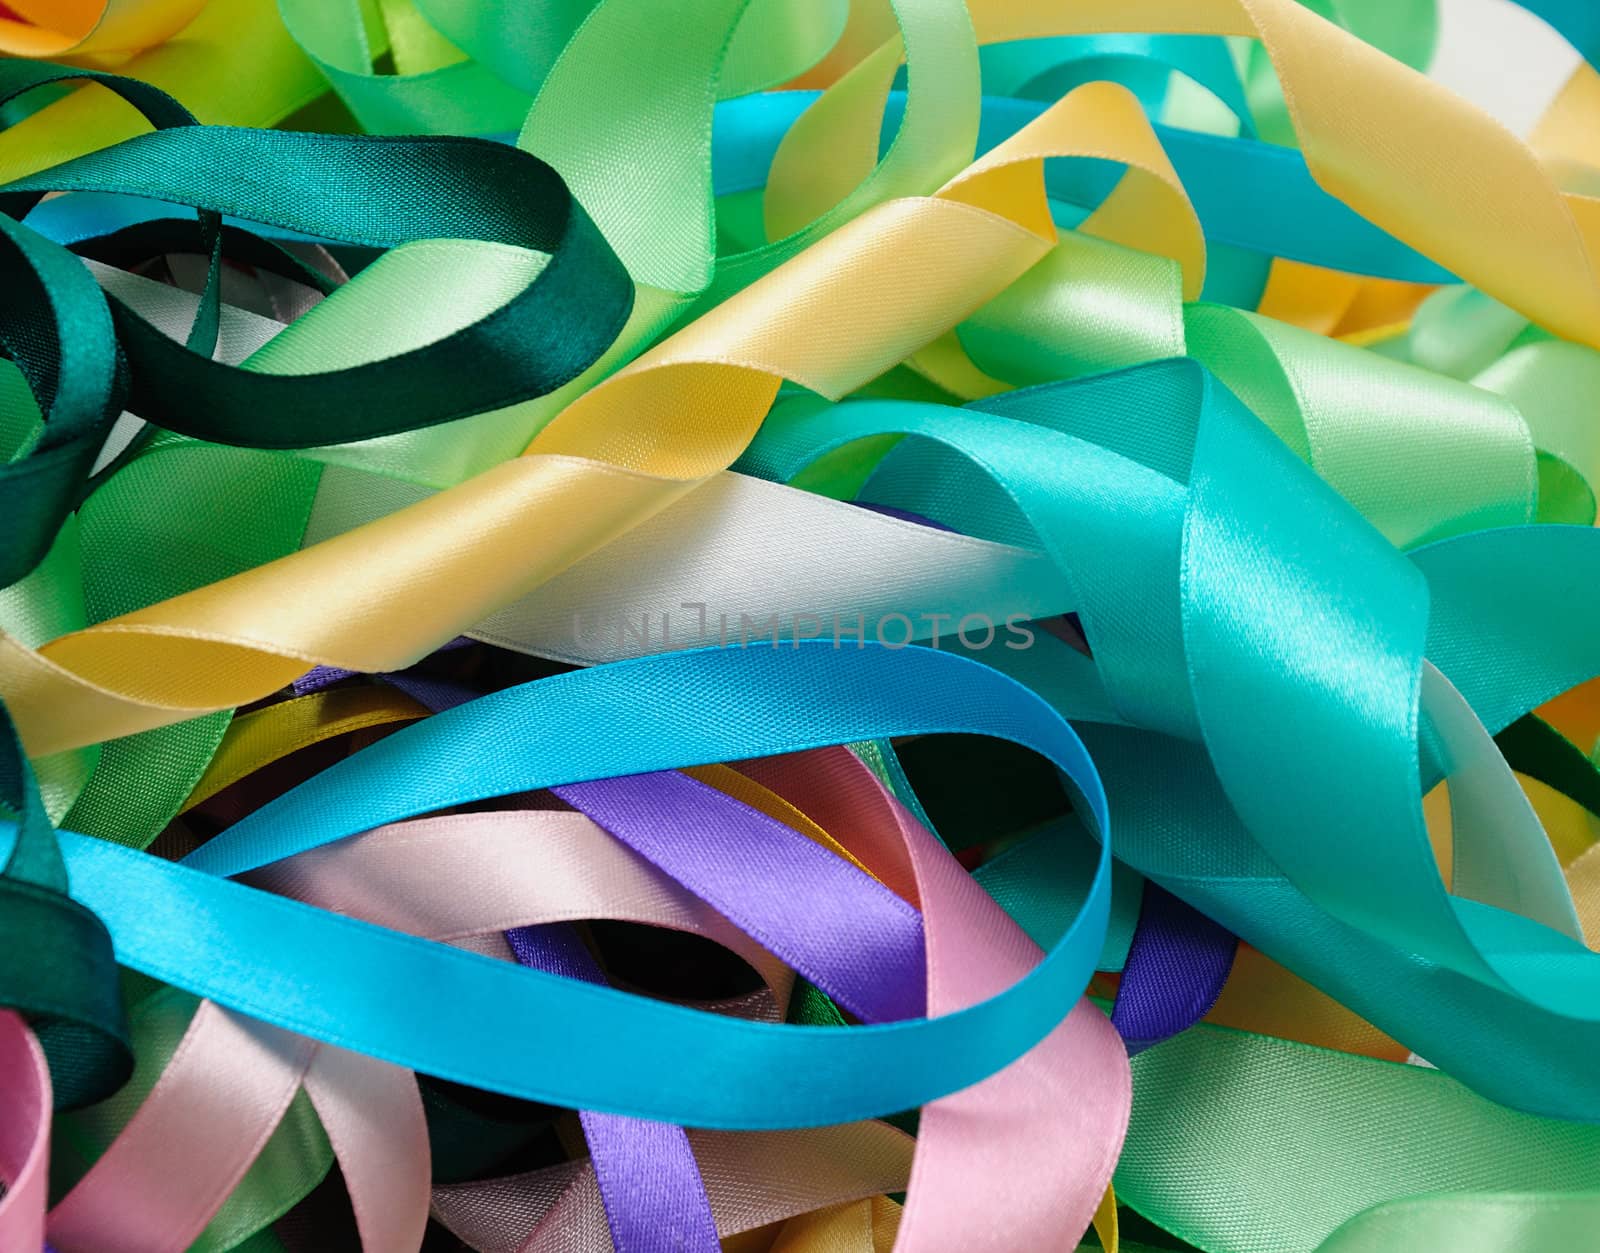 Multi-colored satin ribbons by Apolonia